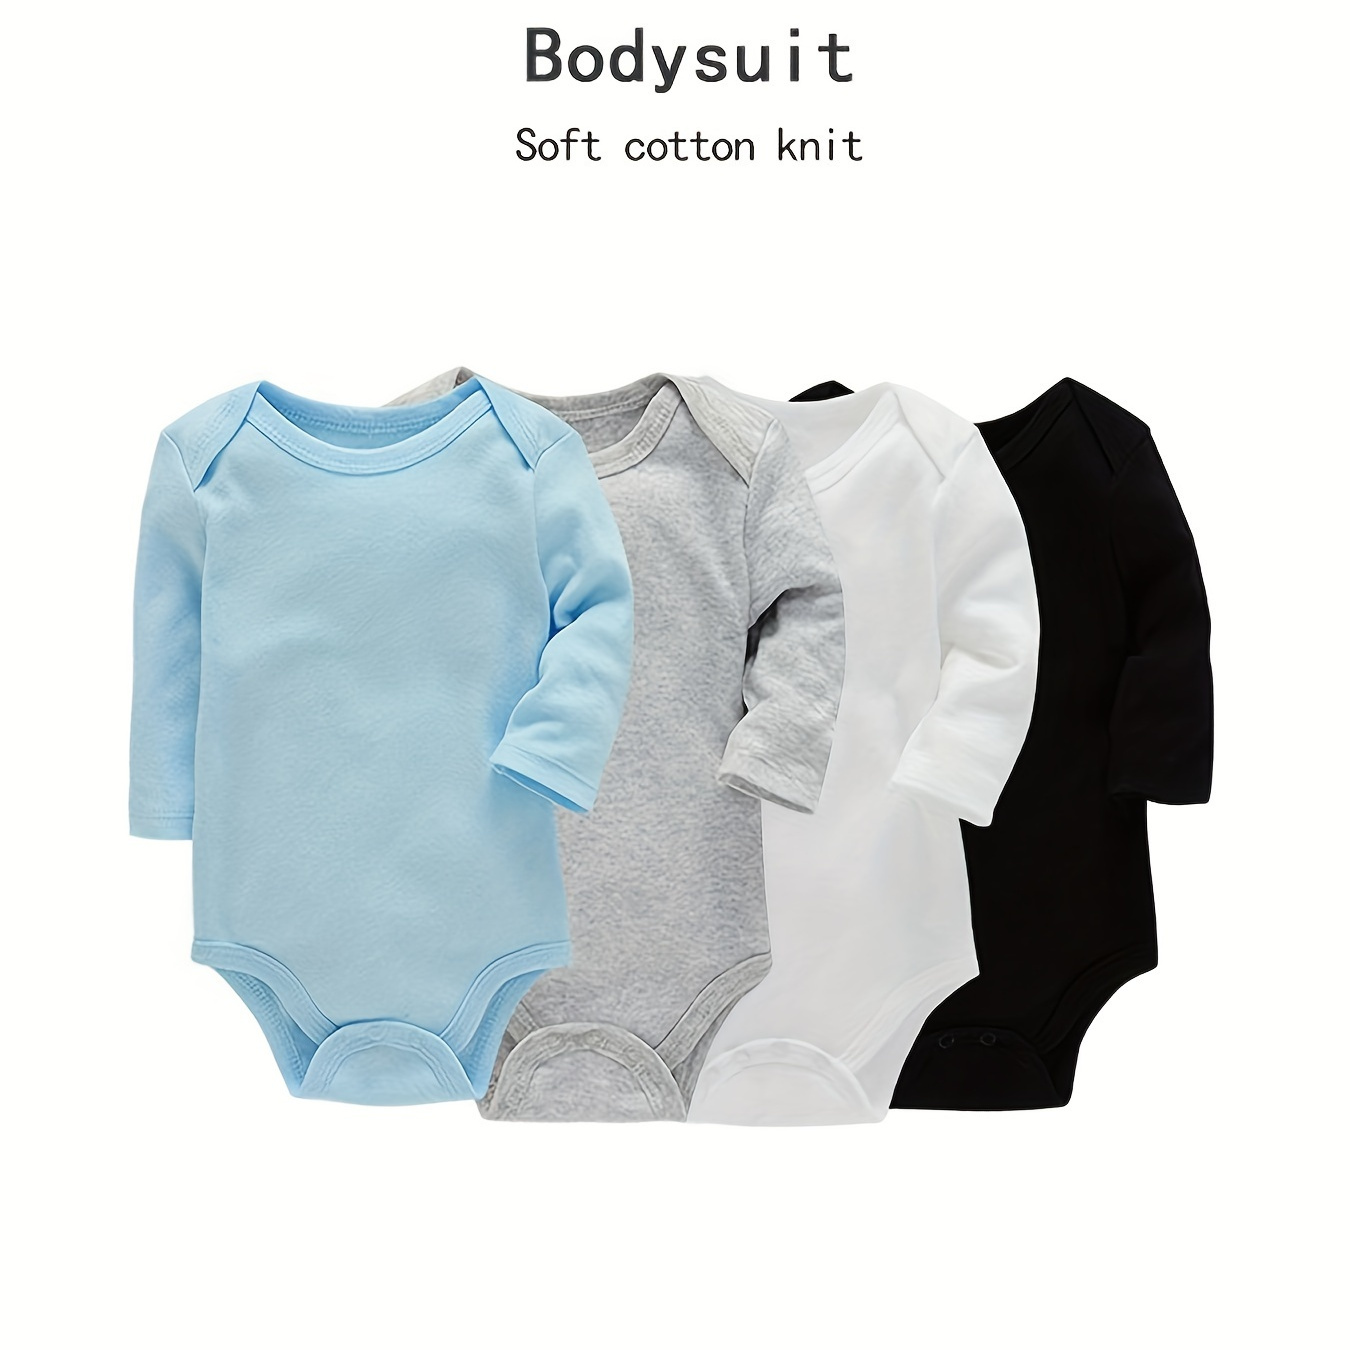 

4pcs Baby Boy's 100% Cotton Bodysuits, Knit Long Sleeve Onesies, Plain Solid Colors Infant Base Rompers, Casual Style For Newborns